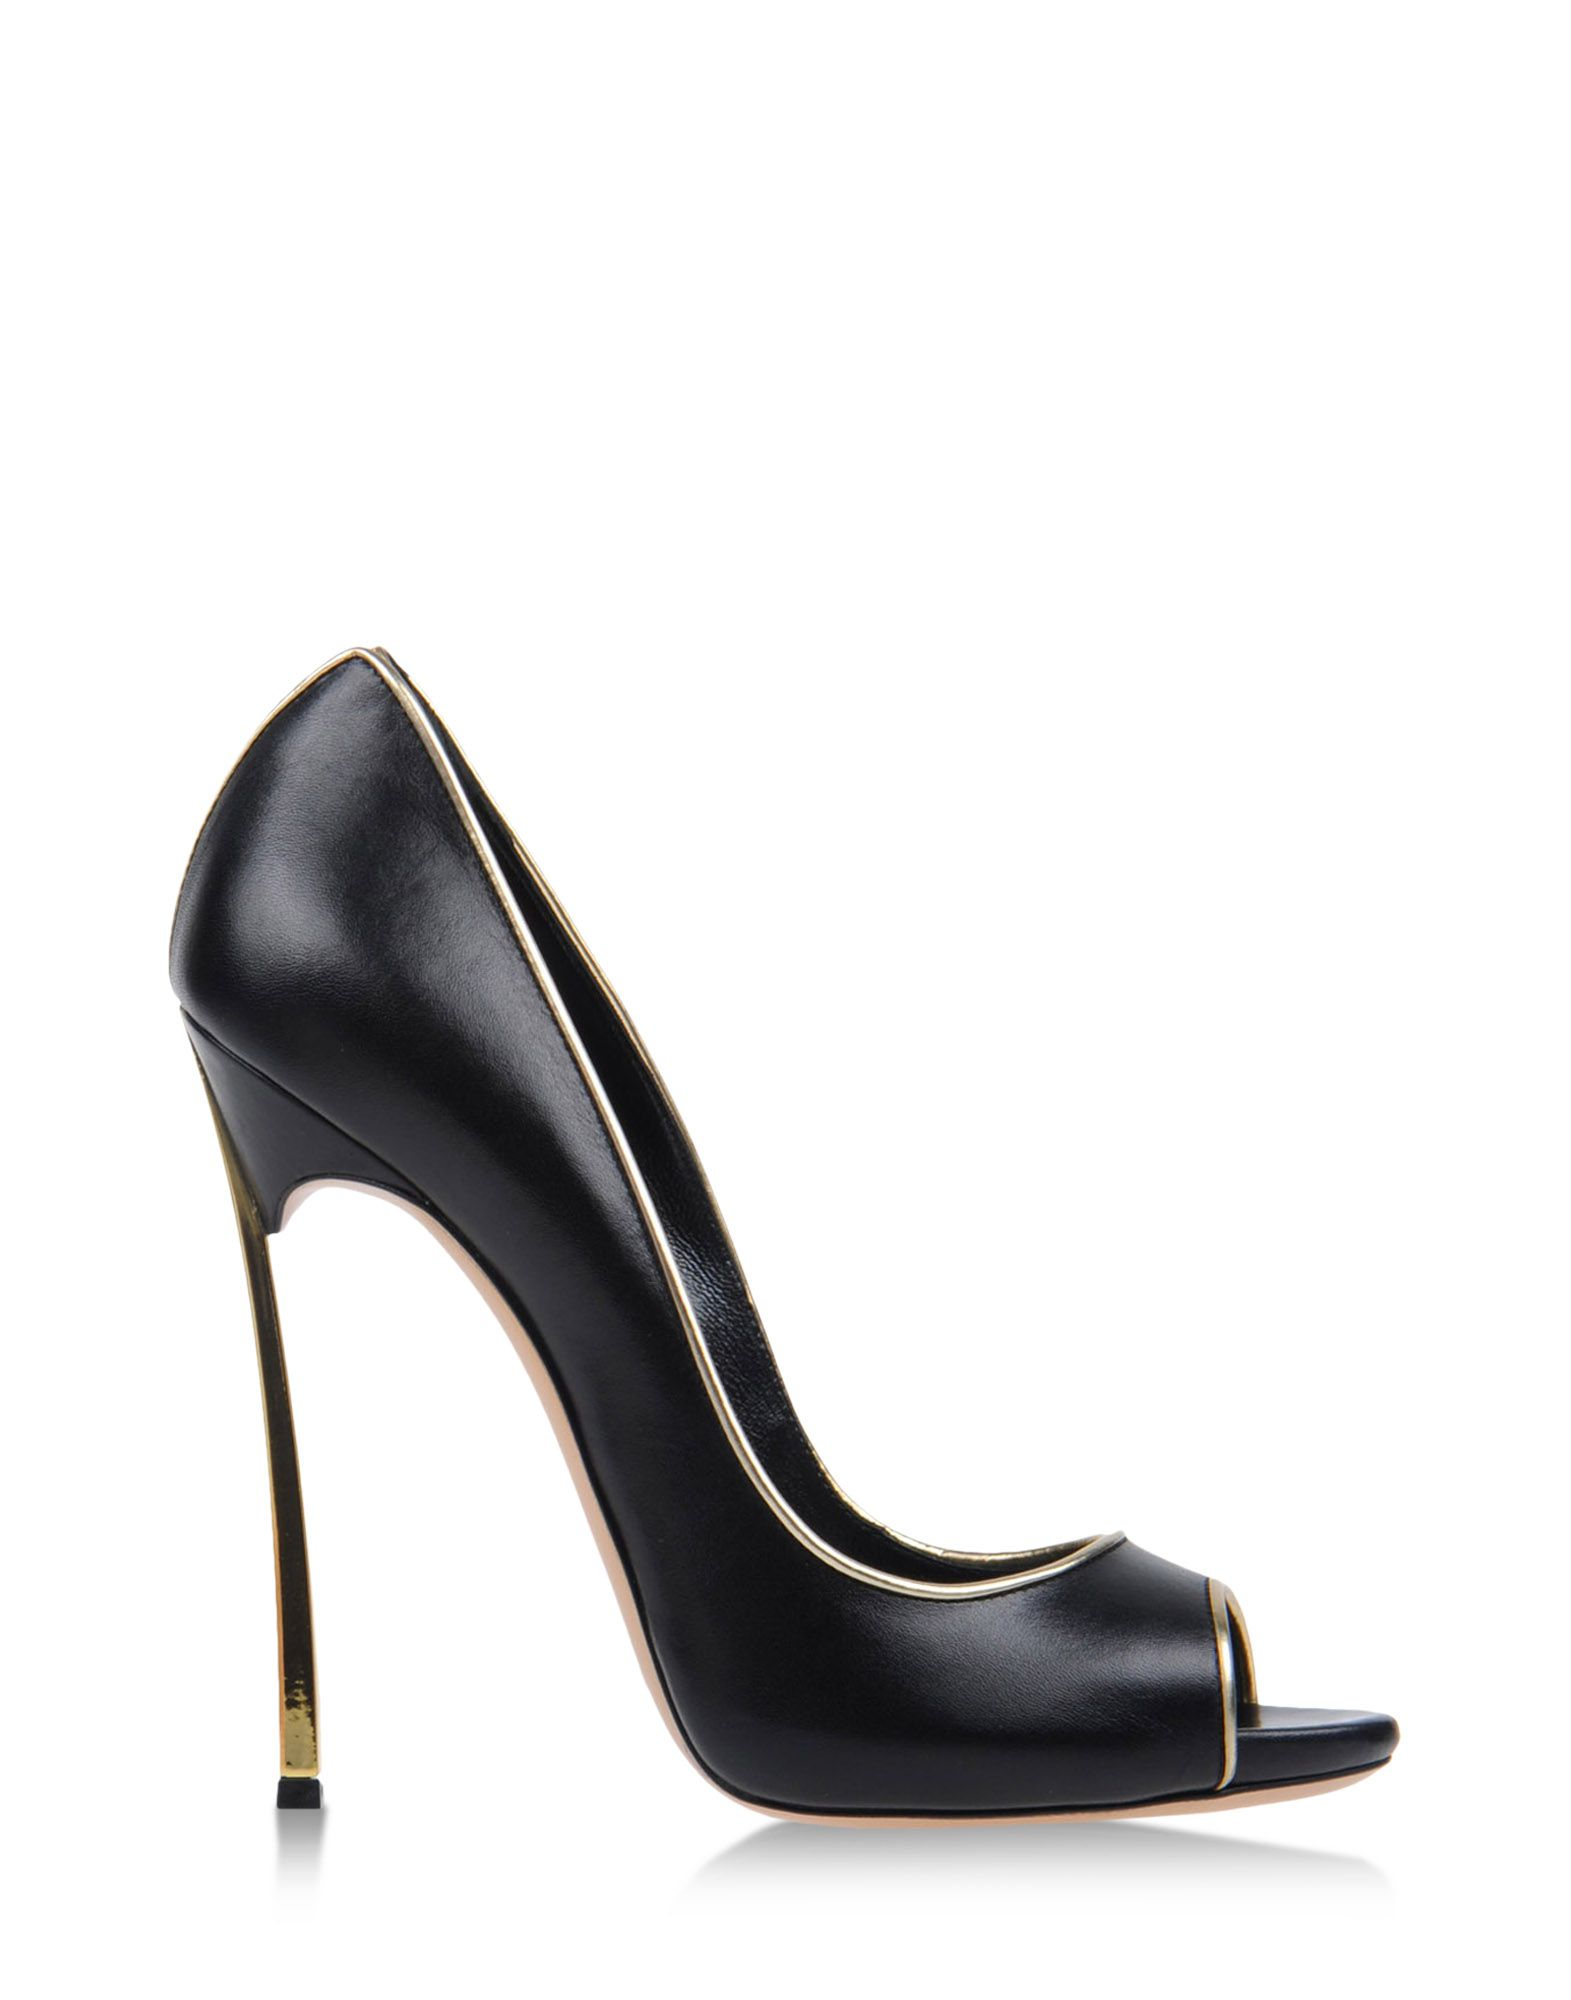 Casadei Pumps With Open Toe in Black